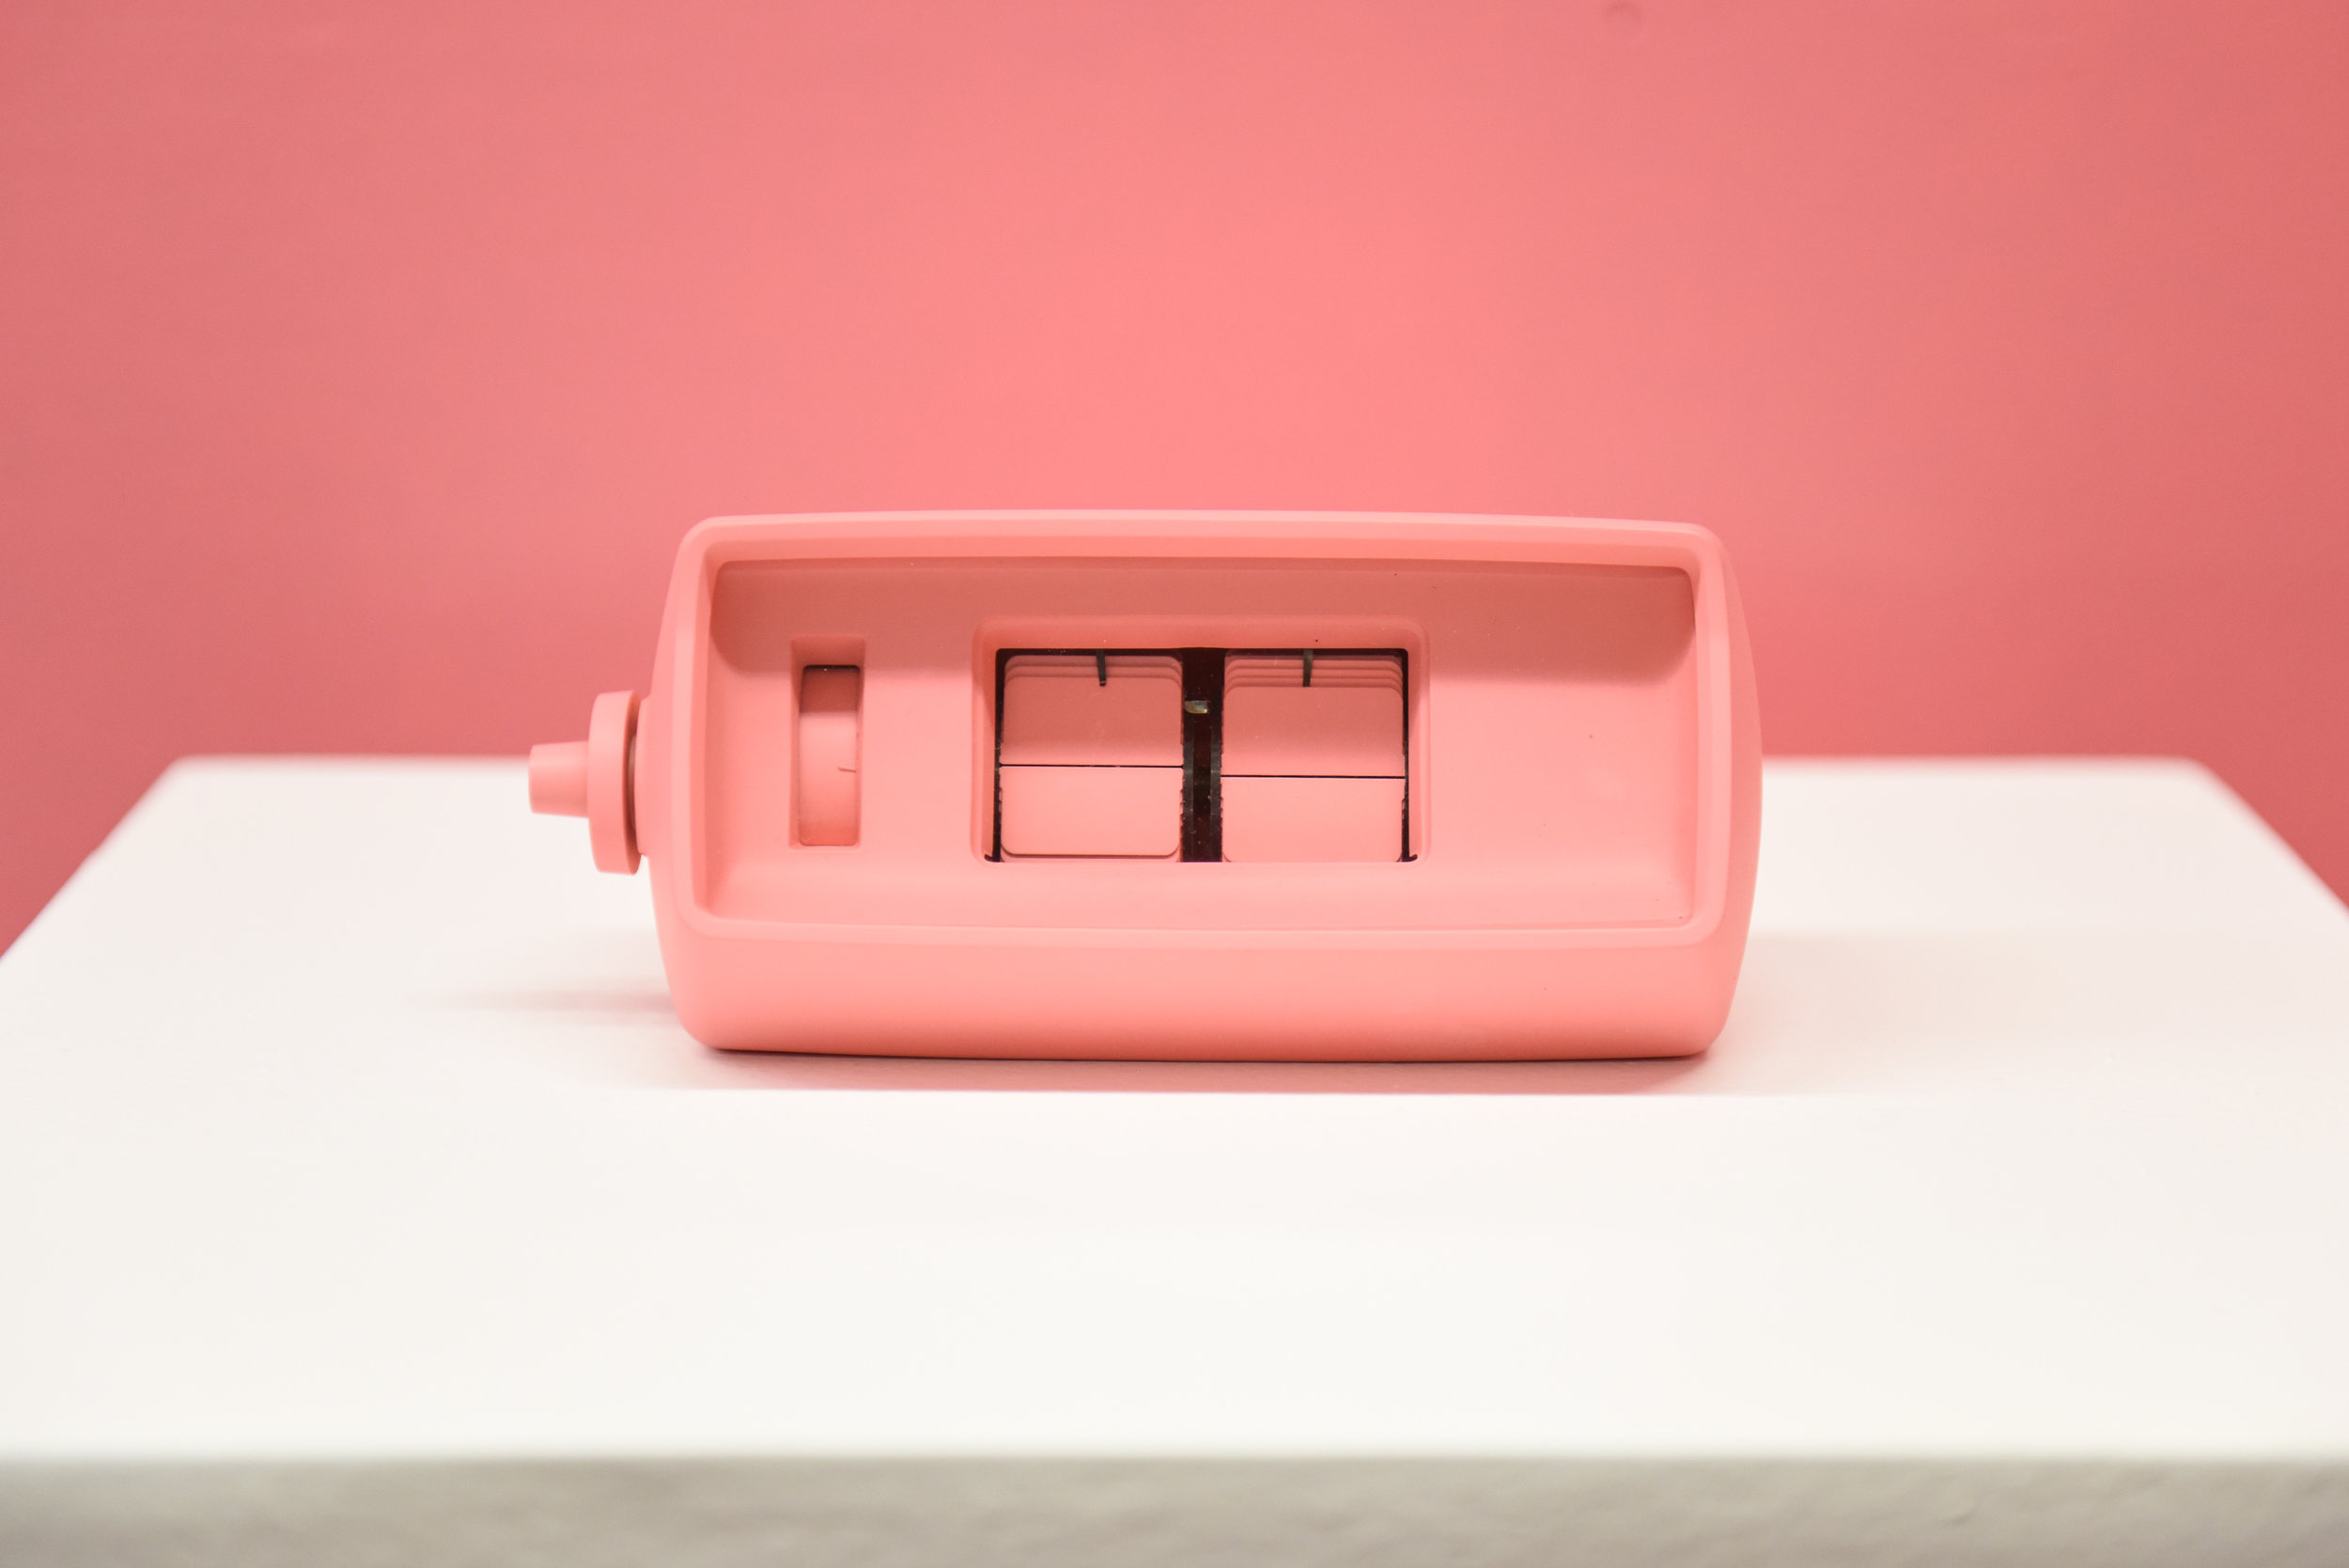   It's Schauss Time   2013   Vintage flip clock, Baker-Miller Pink paint   7x3.5x3.5 inches   Human Condition Exhibition curated by John Wolf, Los Angeles, CA. 10/01/16 